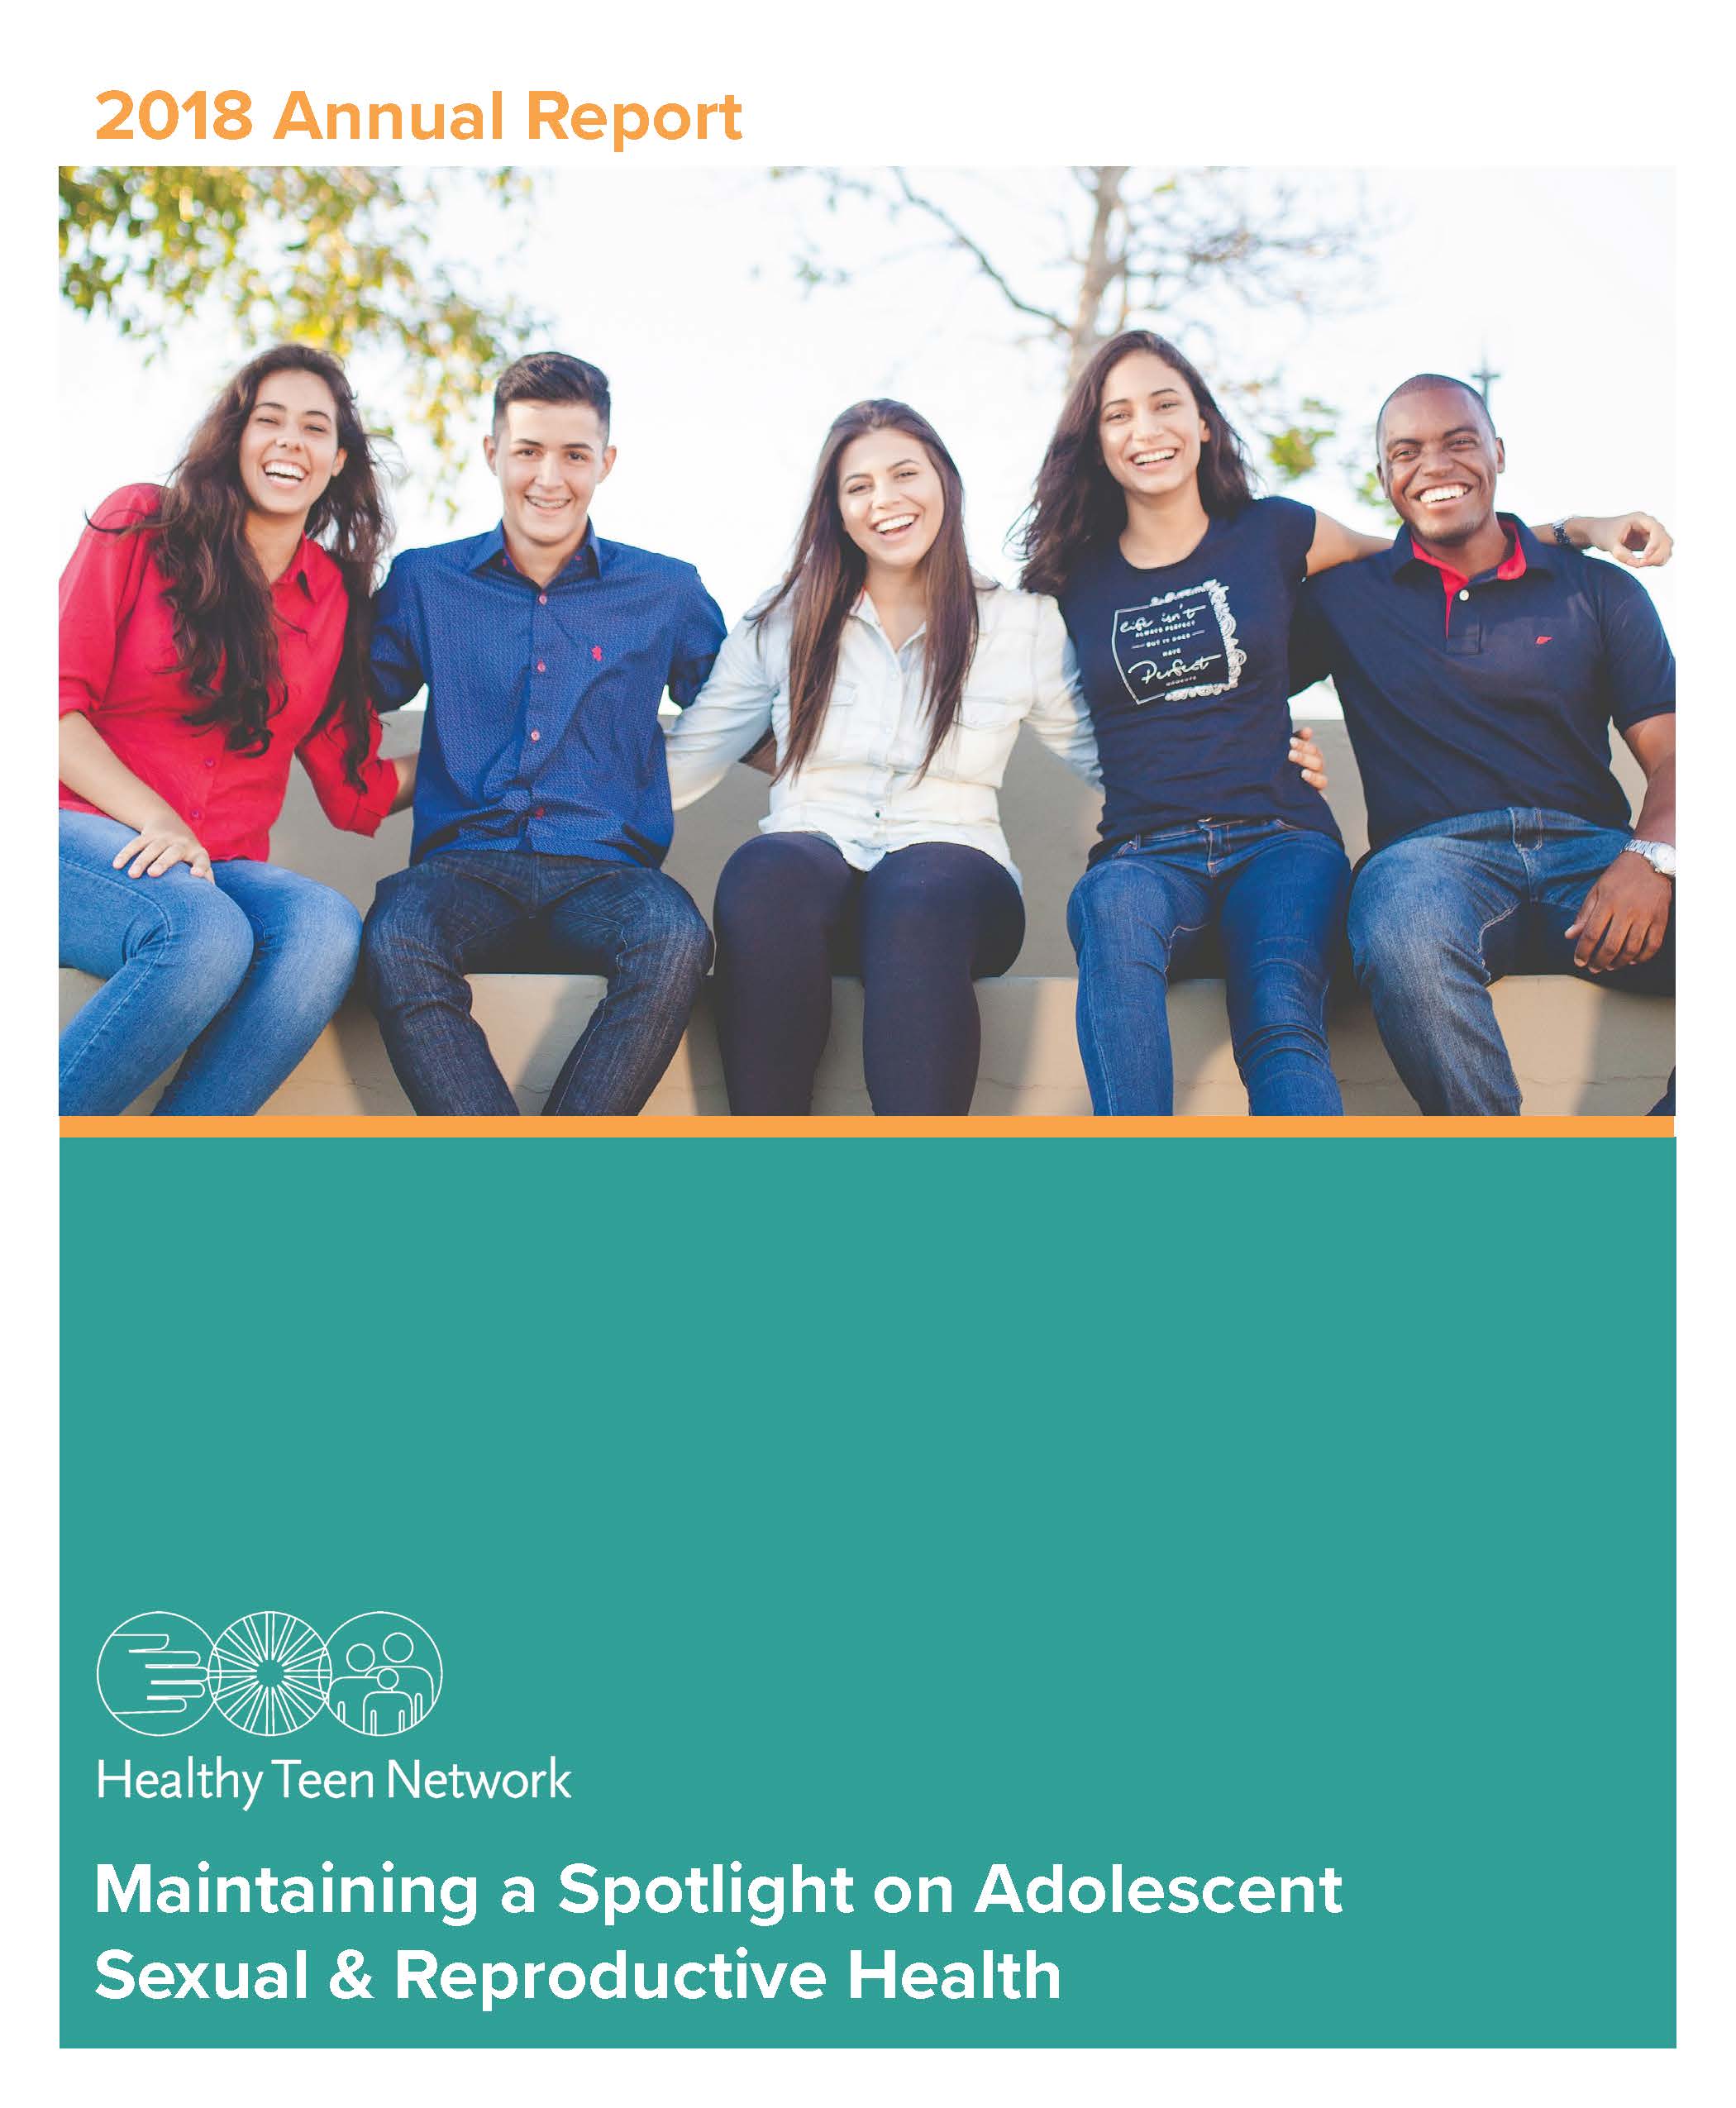 Image of cover of 2018 annual report. Includes title, with 5 young people sitting together, in a row, outside, smiling, with arms around each other's shoulders.